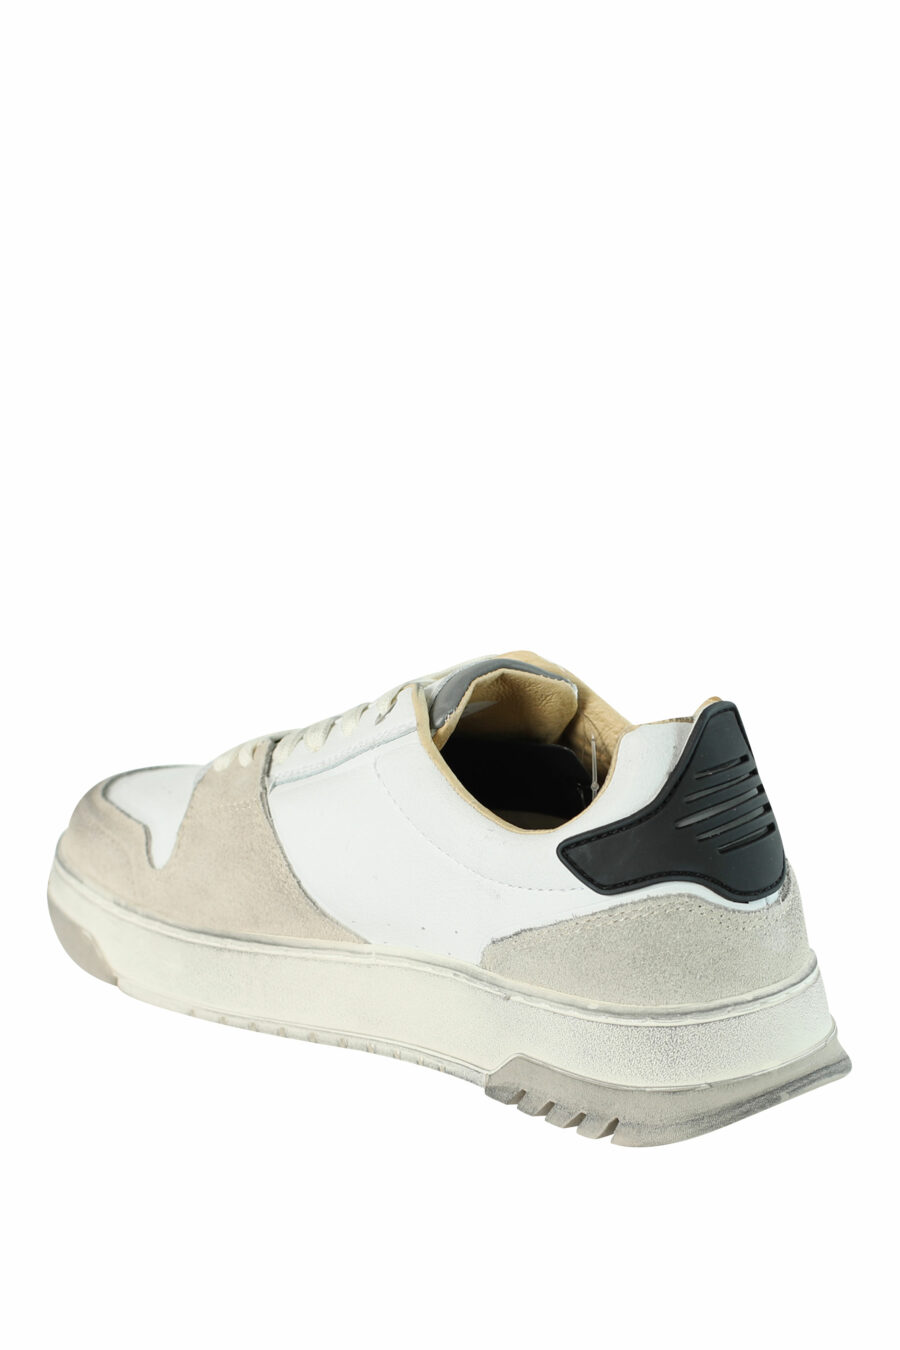 Trainers "HARPER" white mix with beige - 8058156494961 4